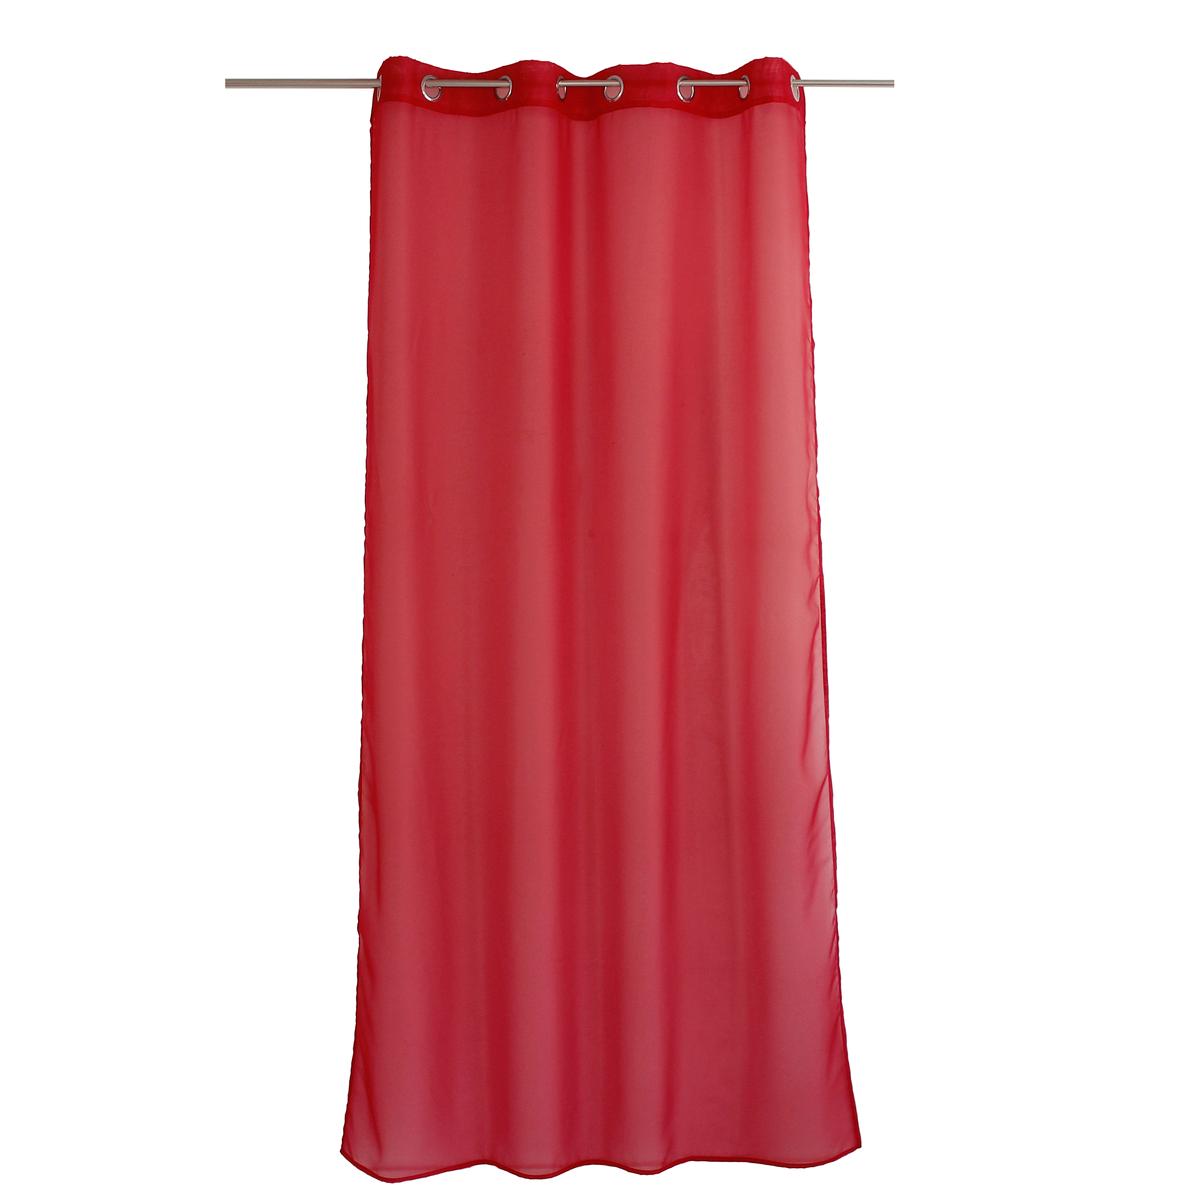 Voilage - 100% polyester - 145 x 240 cm - Rouge